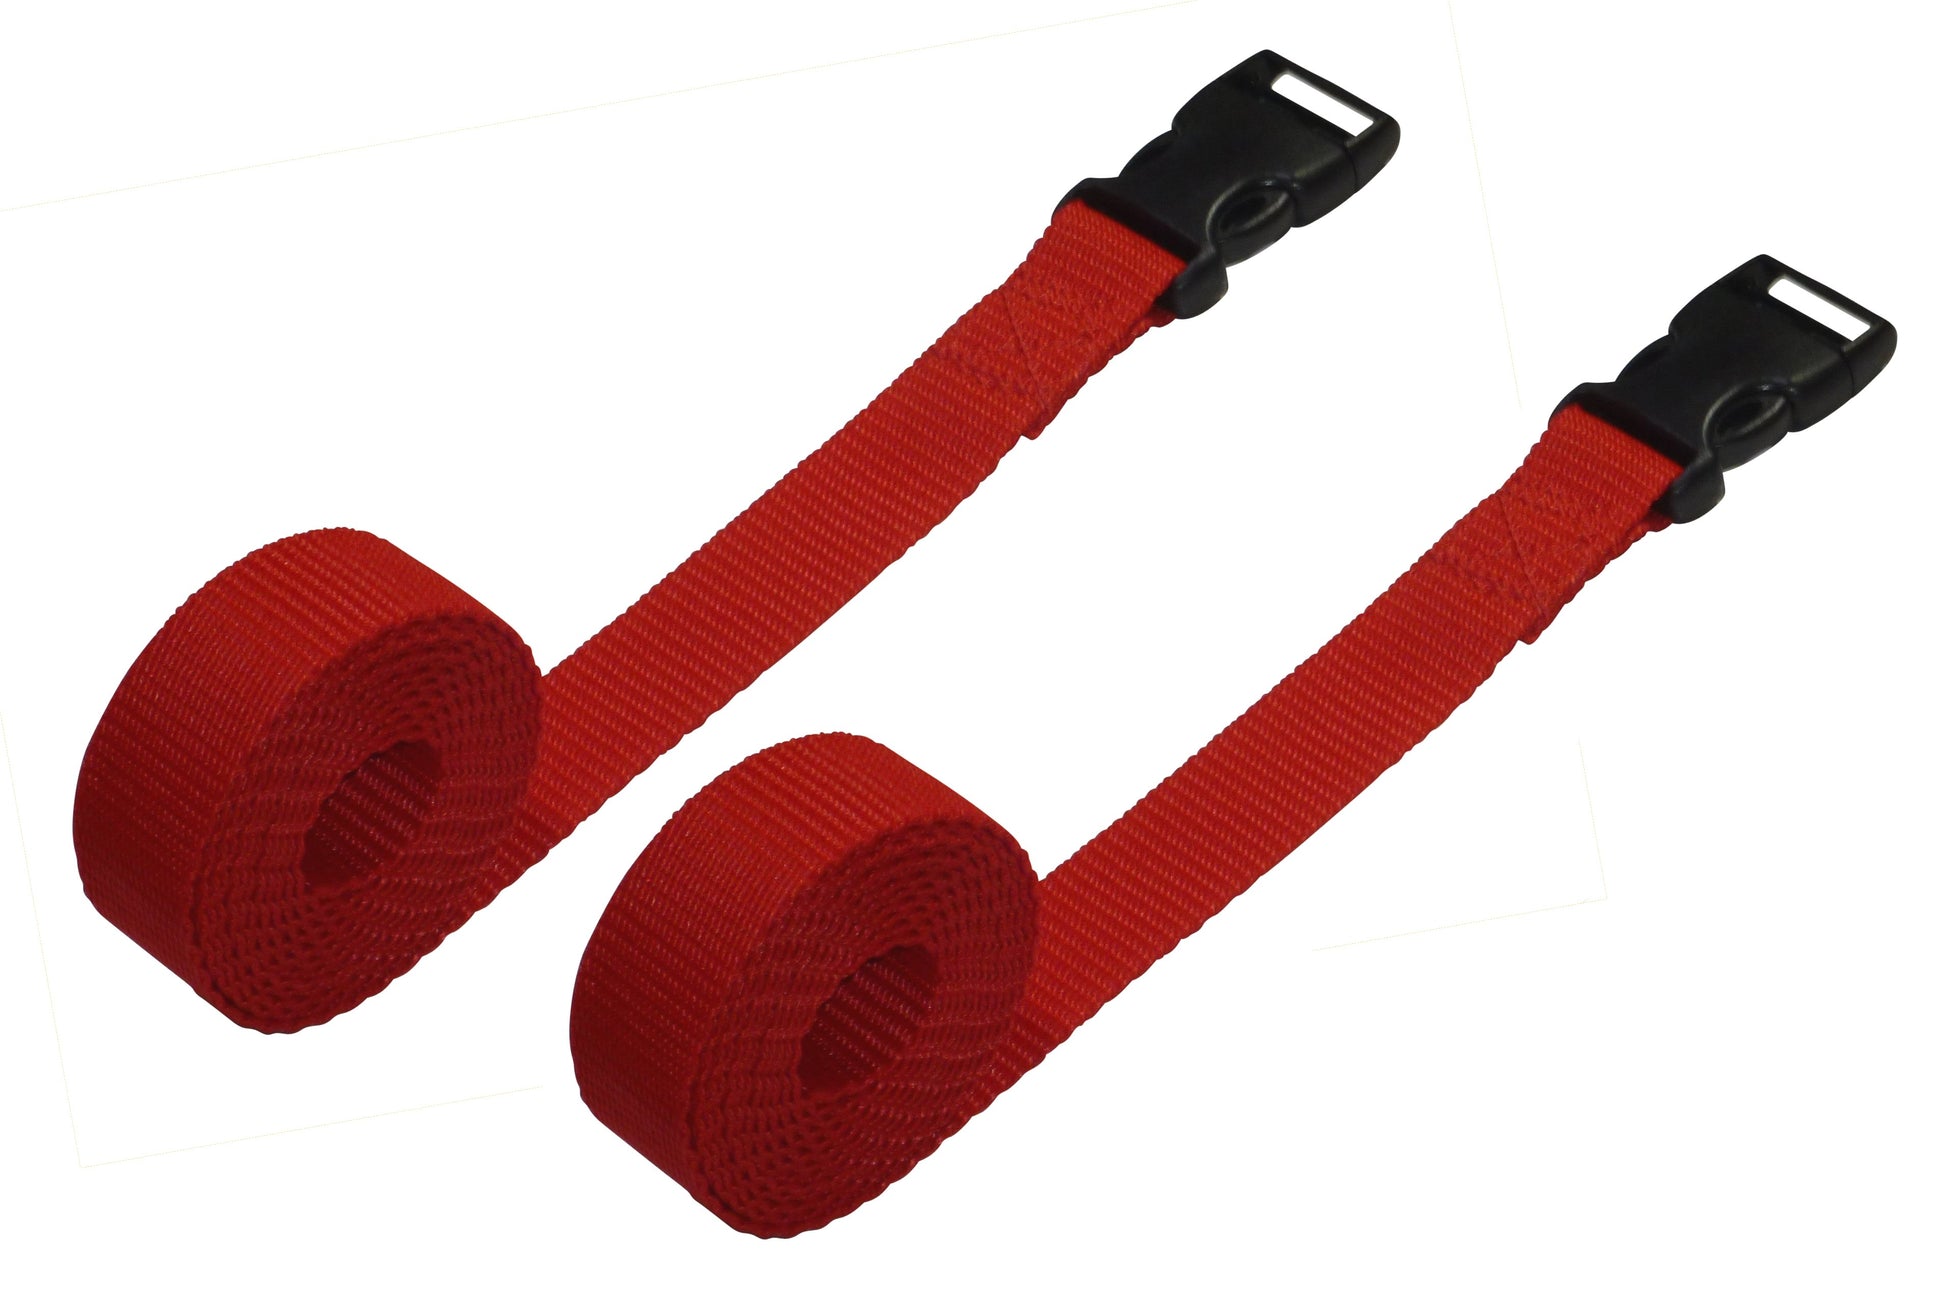 Benristraps 25mm Webbing Strap with Quick Release Buckle (Pair) in red